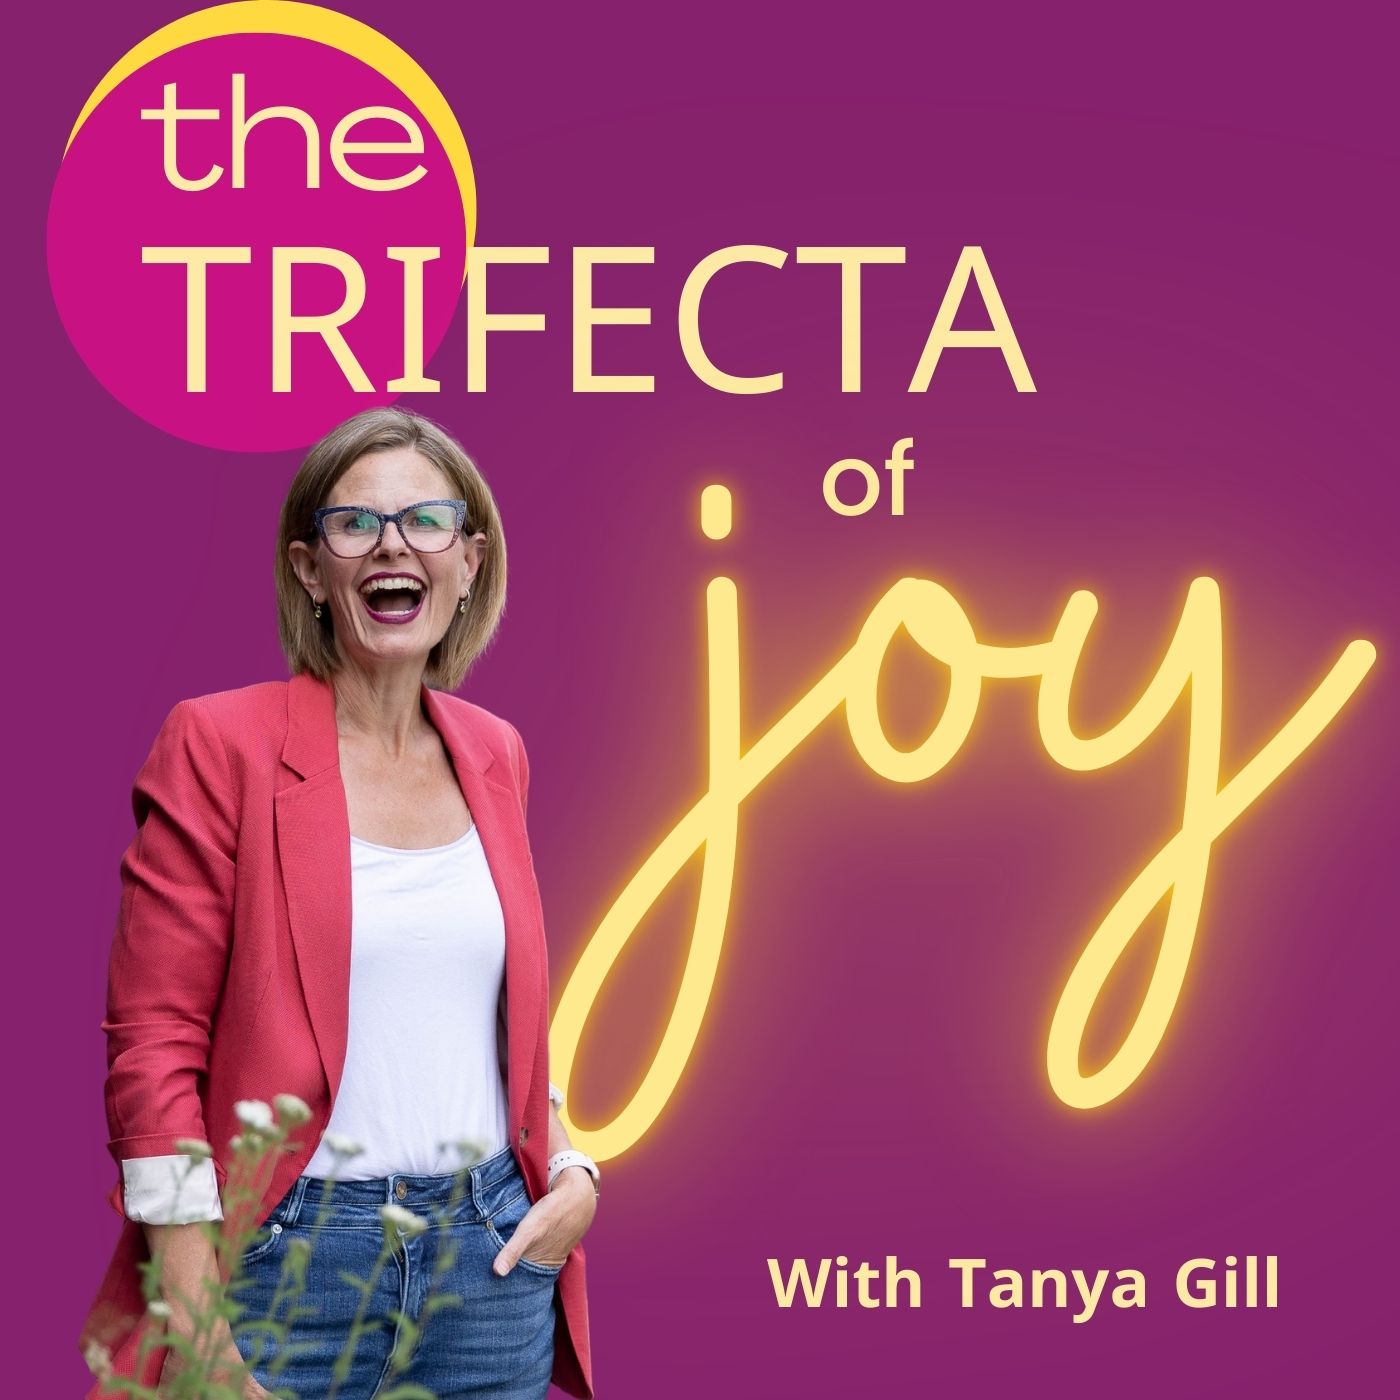 Lighten Up with Tanya Gill